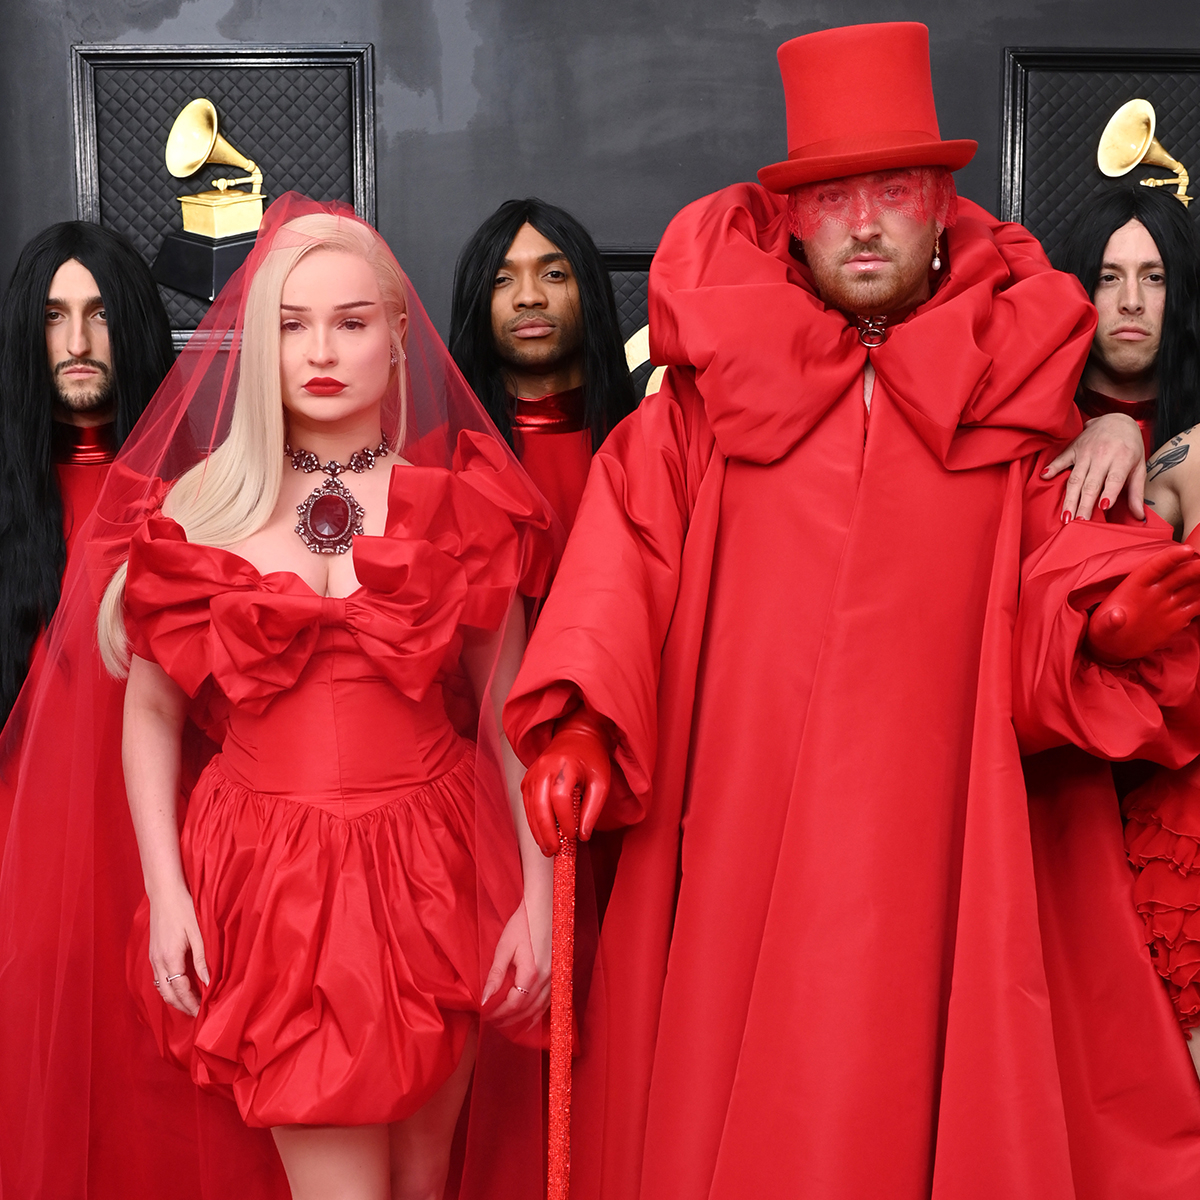 2023 Grammys: You’ll Be Lucky, Lucky to See Sam Smith and Kim Petras’ “Unholy” Performance – E! Online